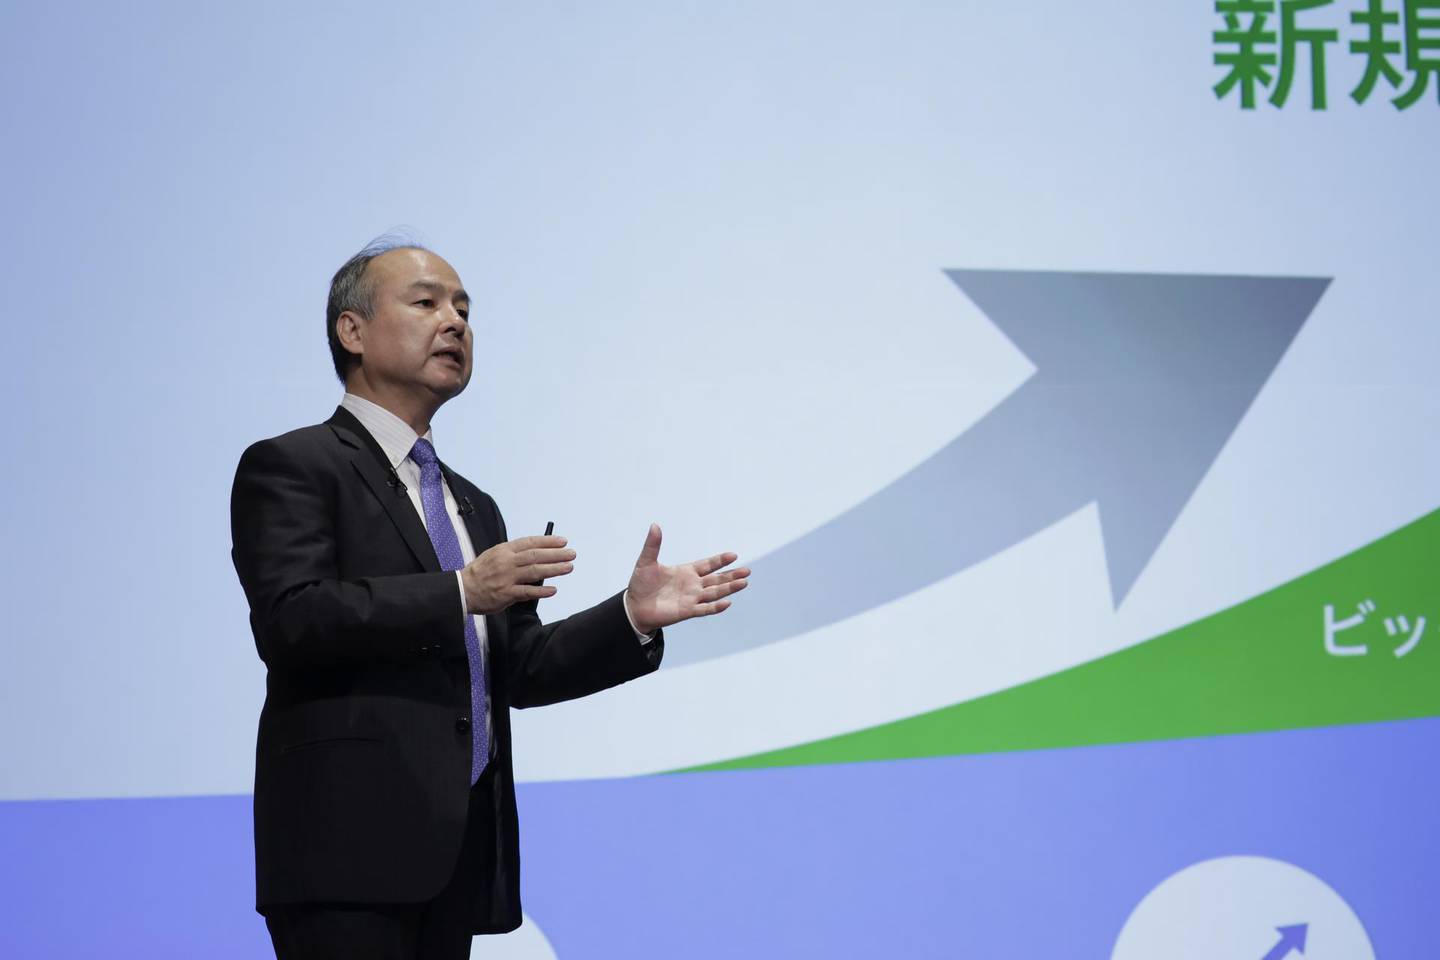 Masayoshi Son, chairman and chief executive officer of SoftBank Group Corp., gestures as he speaks during a news conference in Tokyo, Japan, on Monday, Nov. 5, 2018. SoftBank reported second-quarter profit that far exceeded the highest analyst estimate largely because of multi-billion dollar gains on a handful of his many deals. Photographer: Kiyoshi Ota/Bloomberg